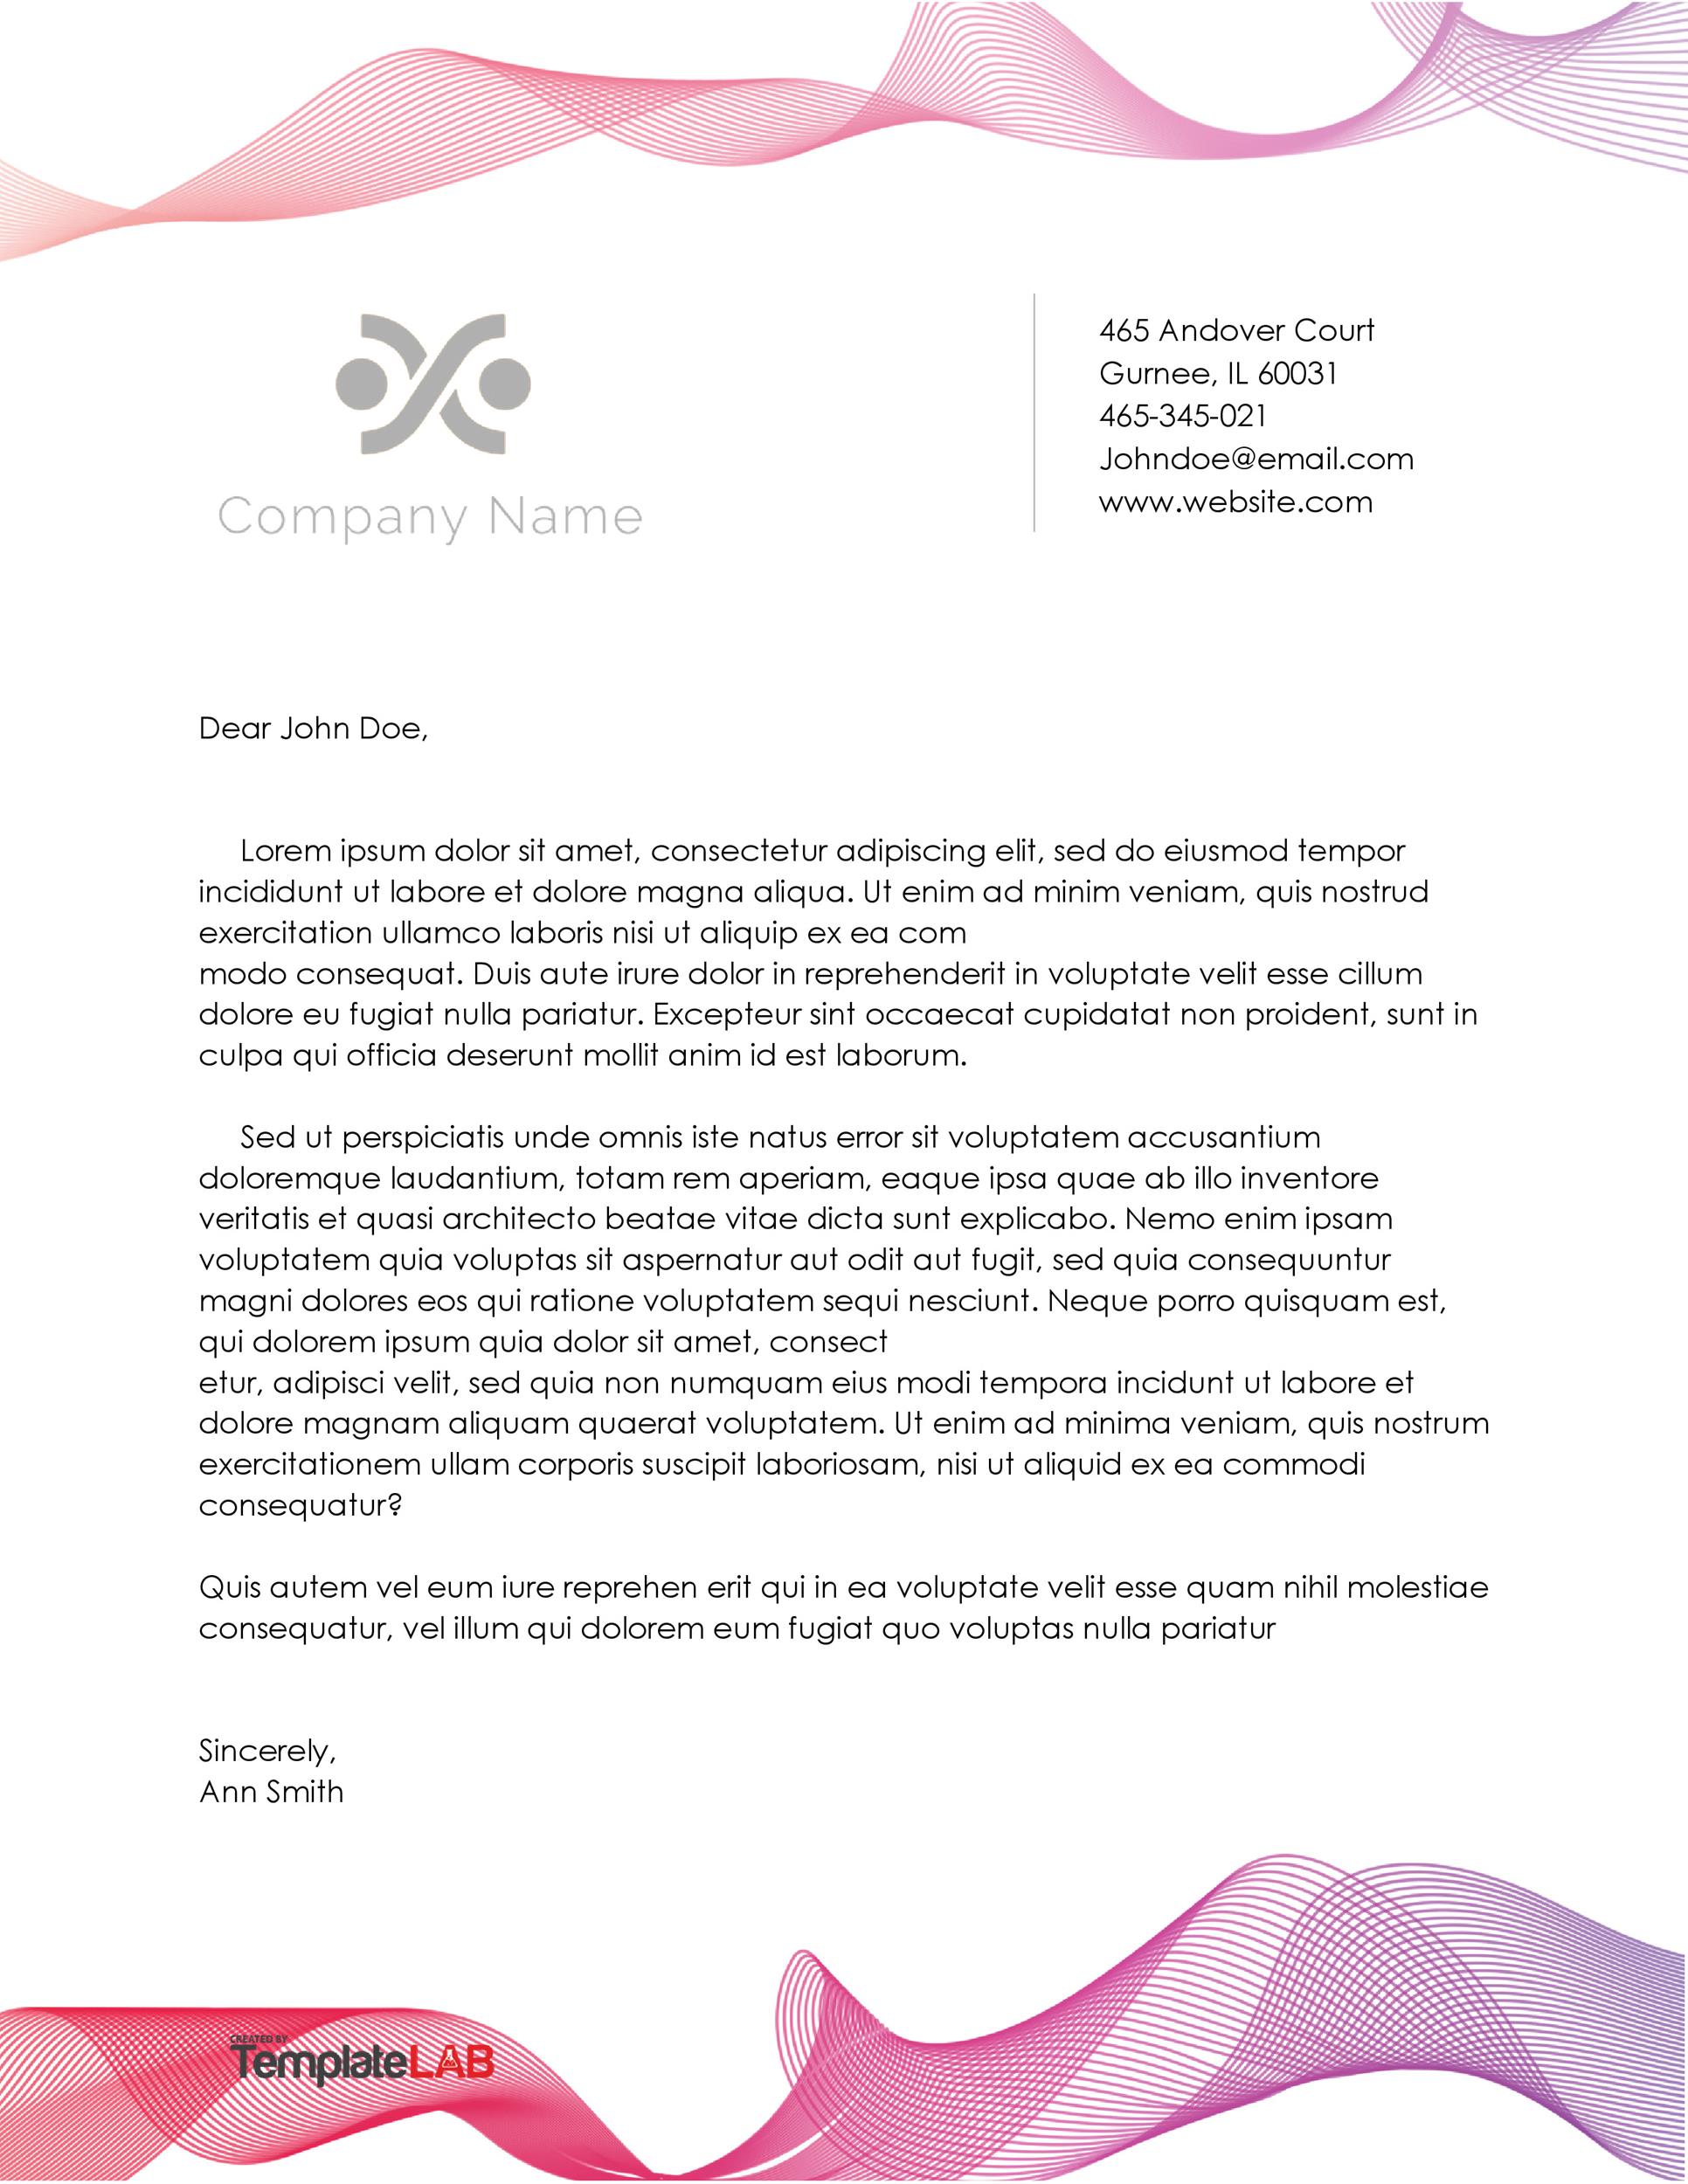 Personal Letter Head Format - Free Business Card & Letterhead Templates